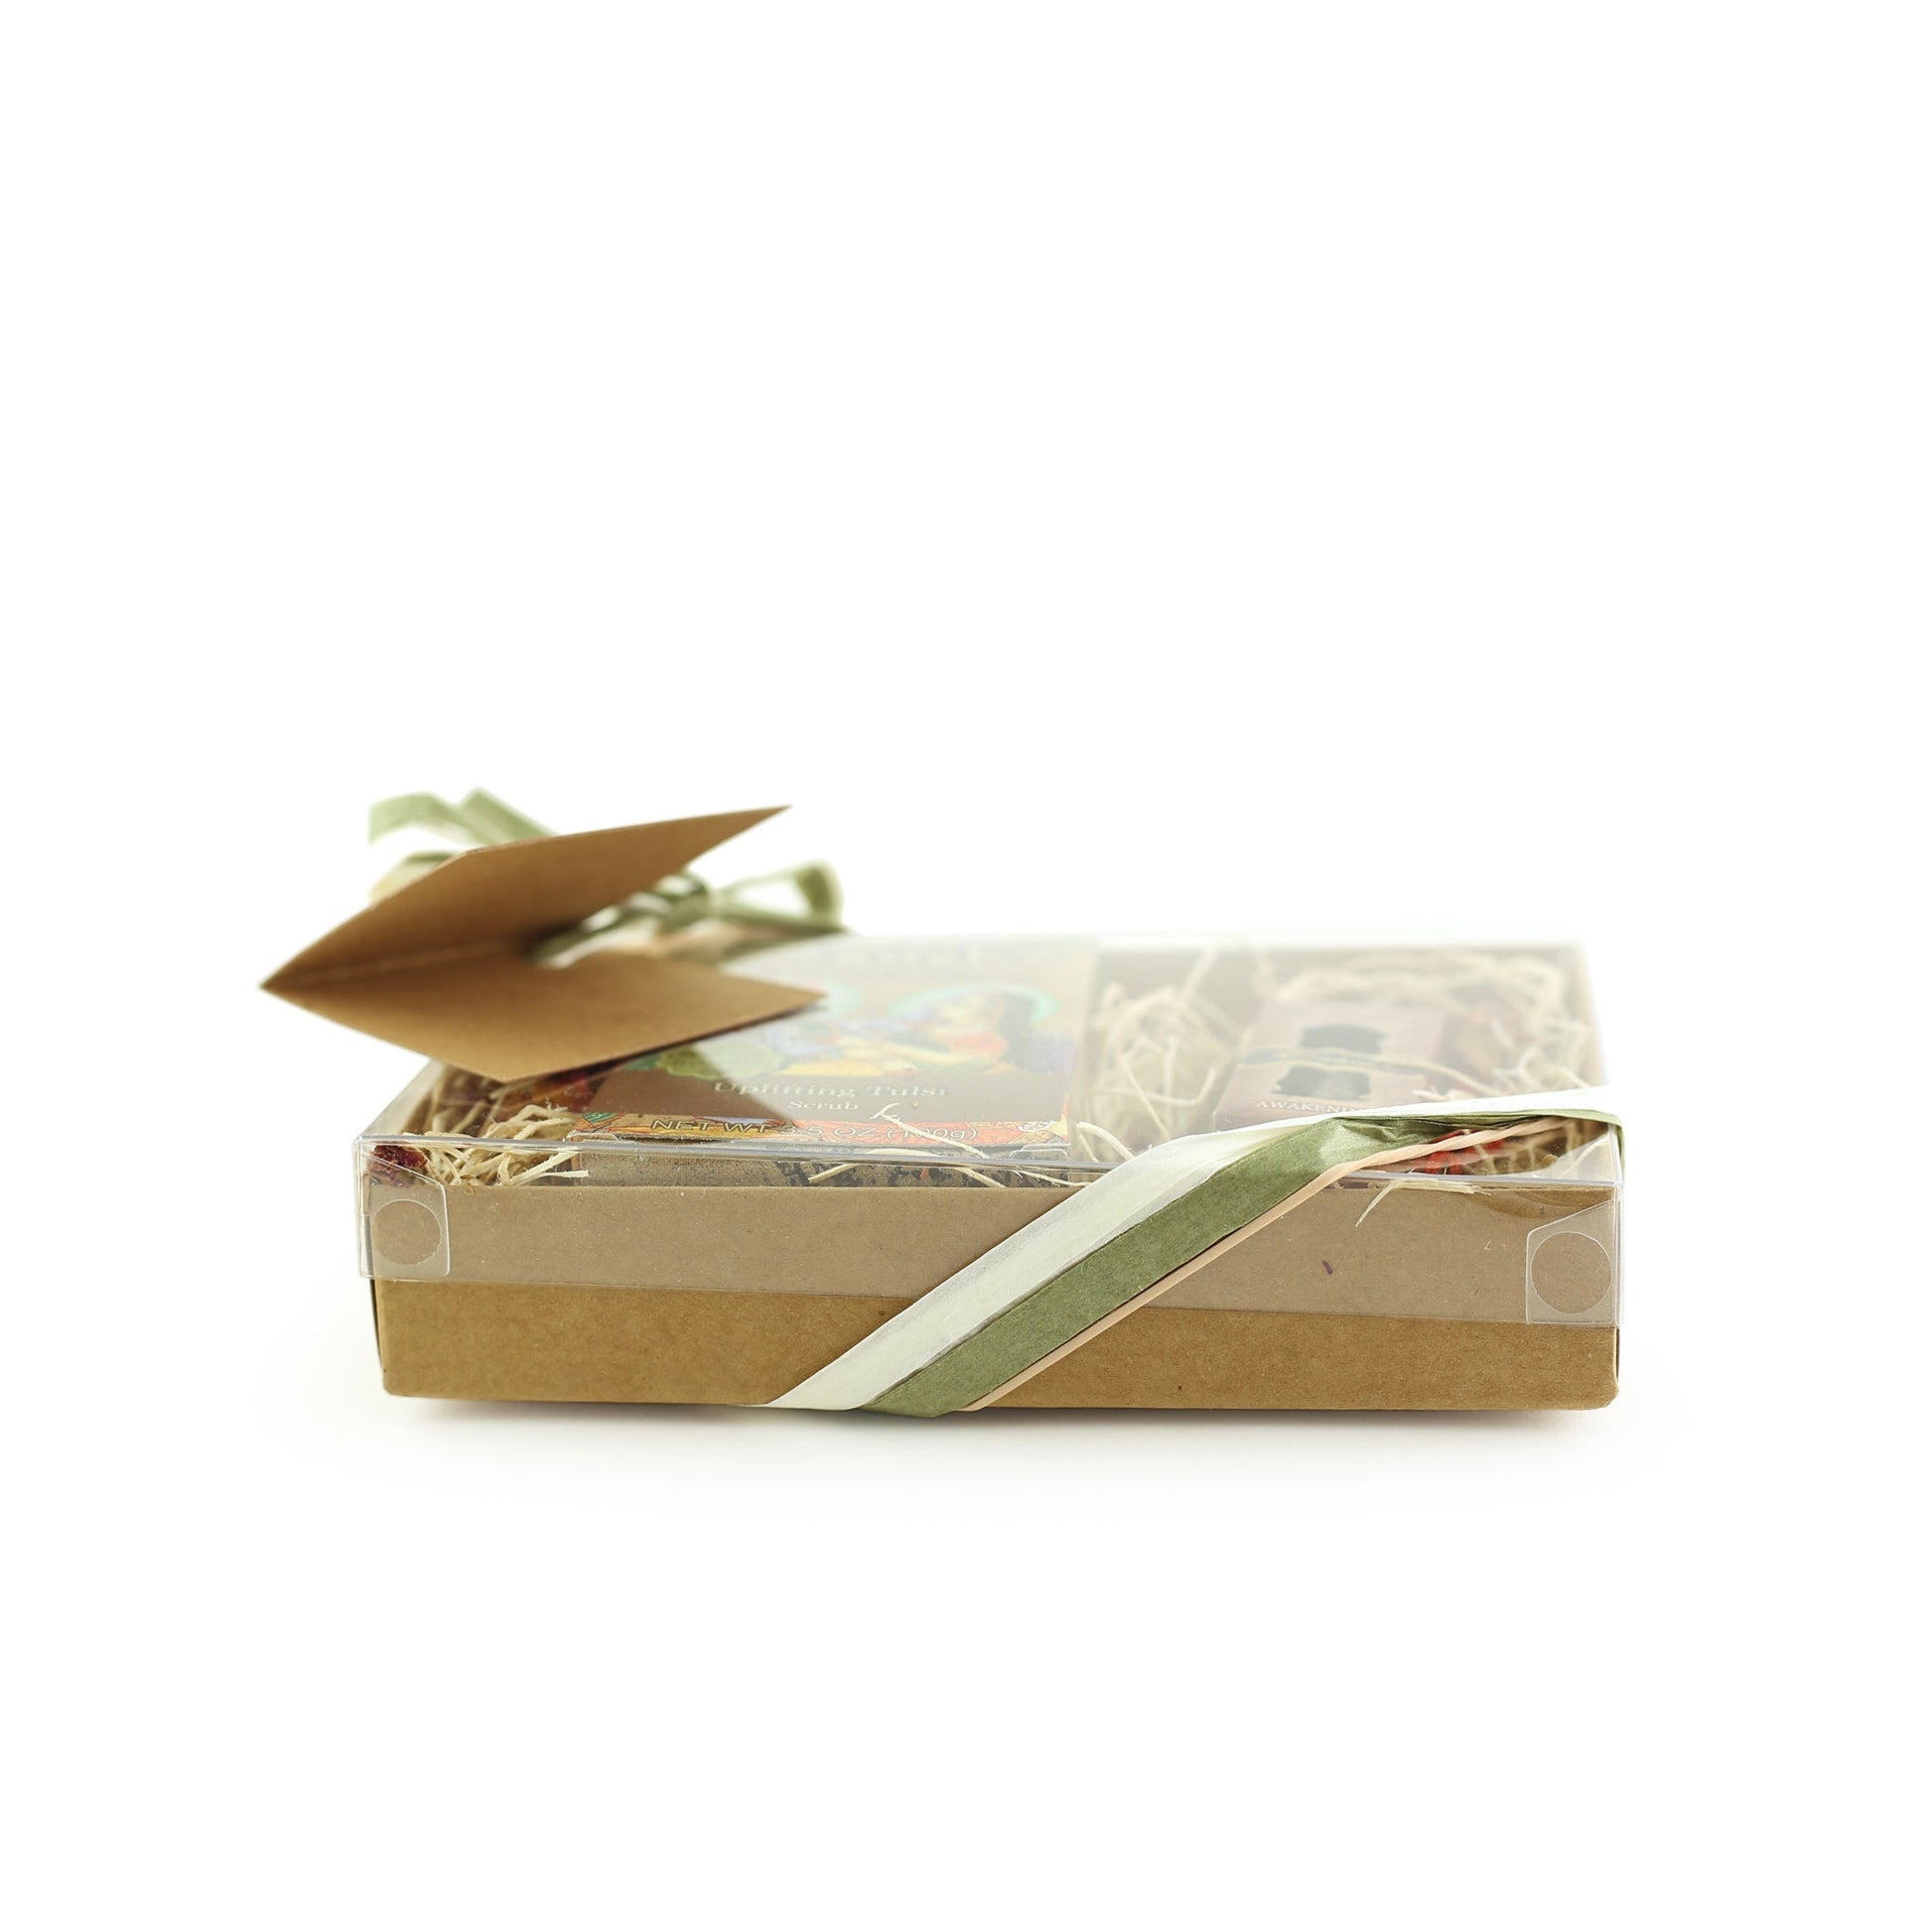 Gift Set - Saucha Bar Soap 'Uplifting Tulsi' and Attar Oil 'Padma' - with Greeting 'For someone as precious as you' - Tree Spirit Wellness